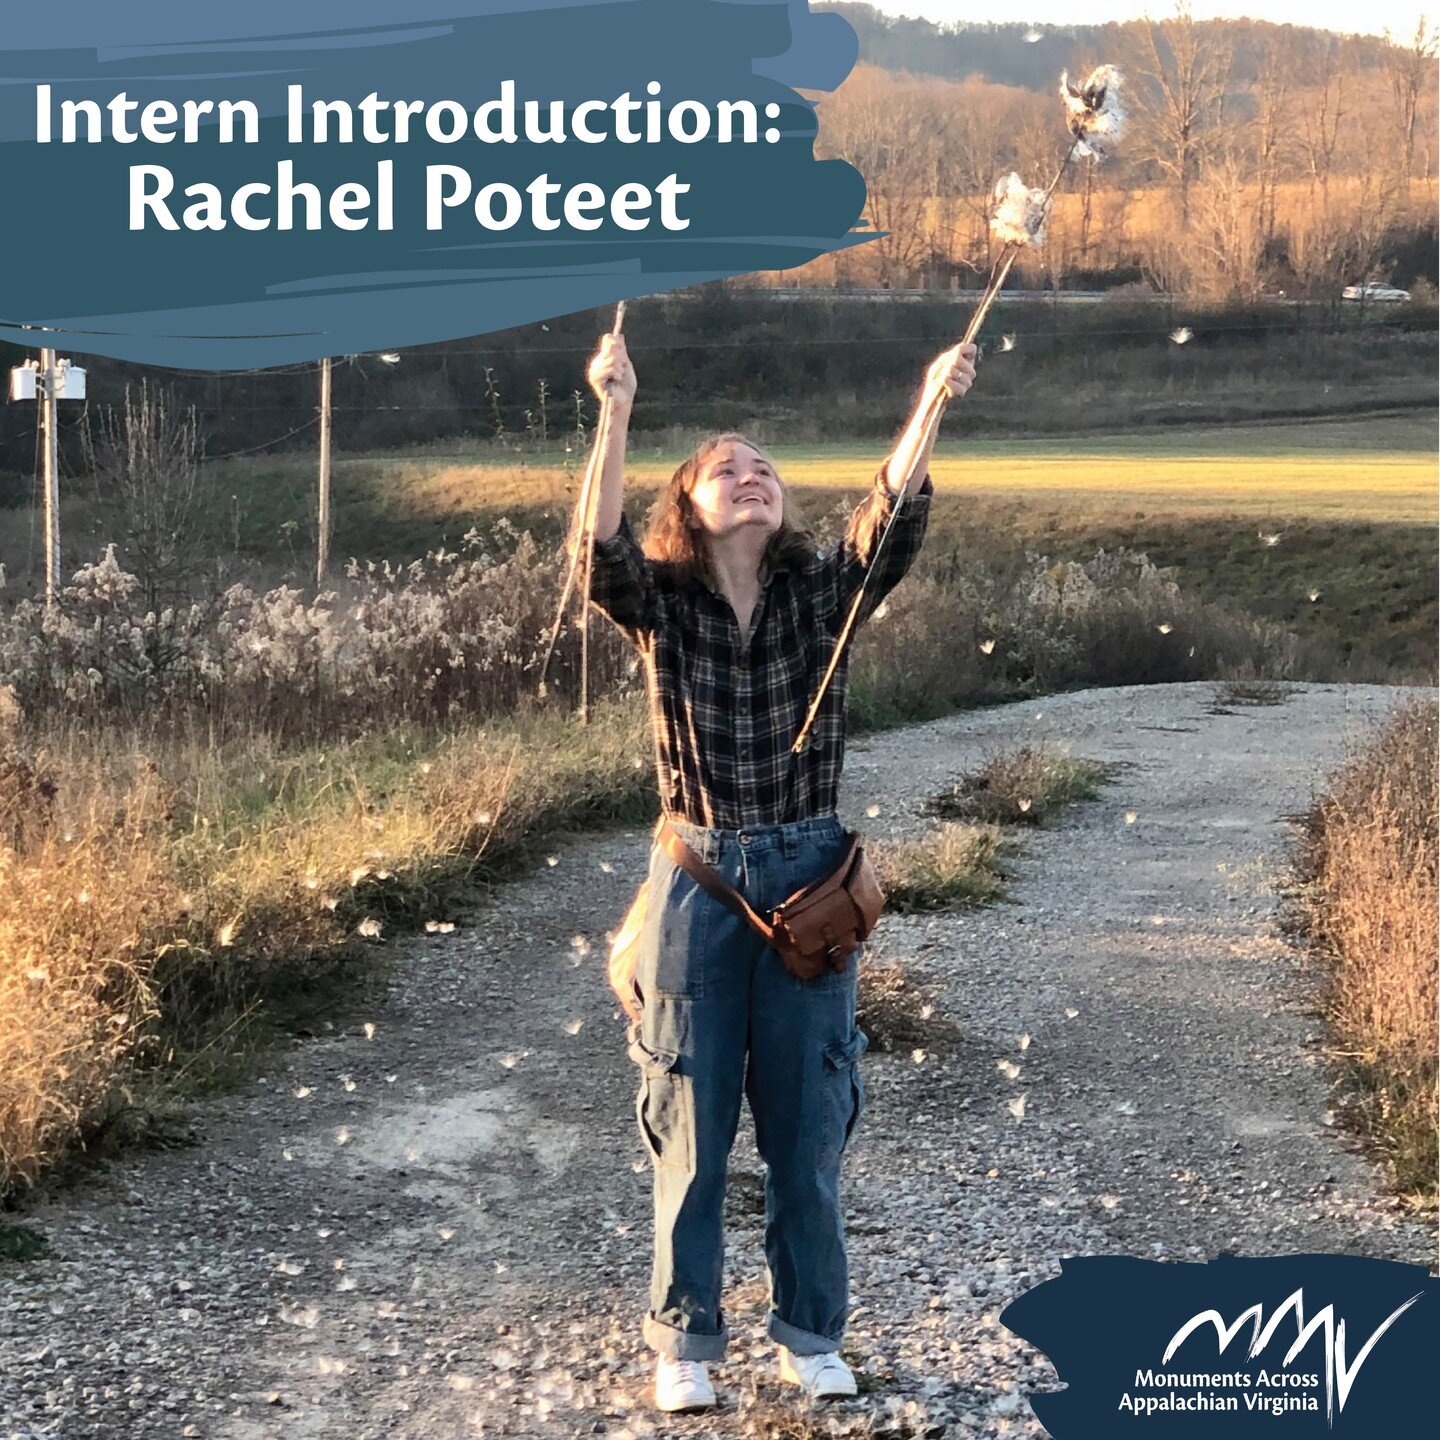 For this #womenshistorywednesday, we'd like to introduce another one of our spectacular interns - Rachel Poteet!

Rachel is a Community Outreach intern majoring in Religion and Culture and minoring in Appalachian Studies. She has been with MAAV since